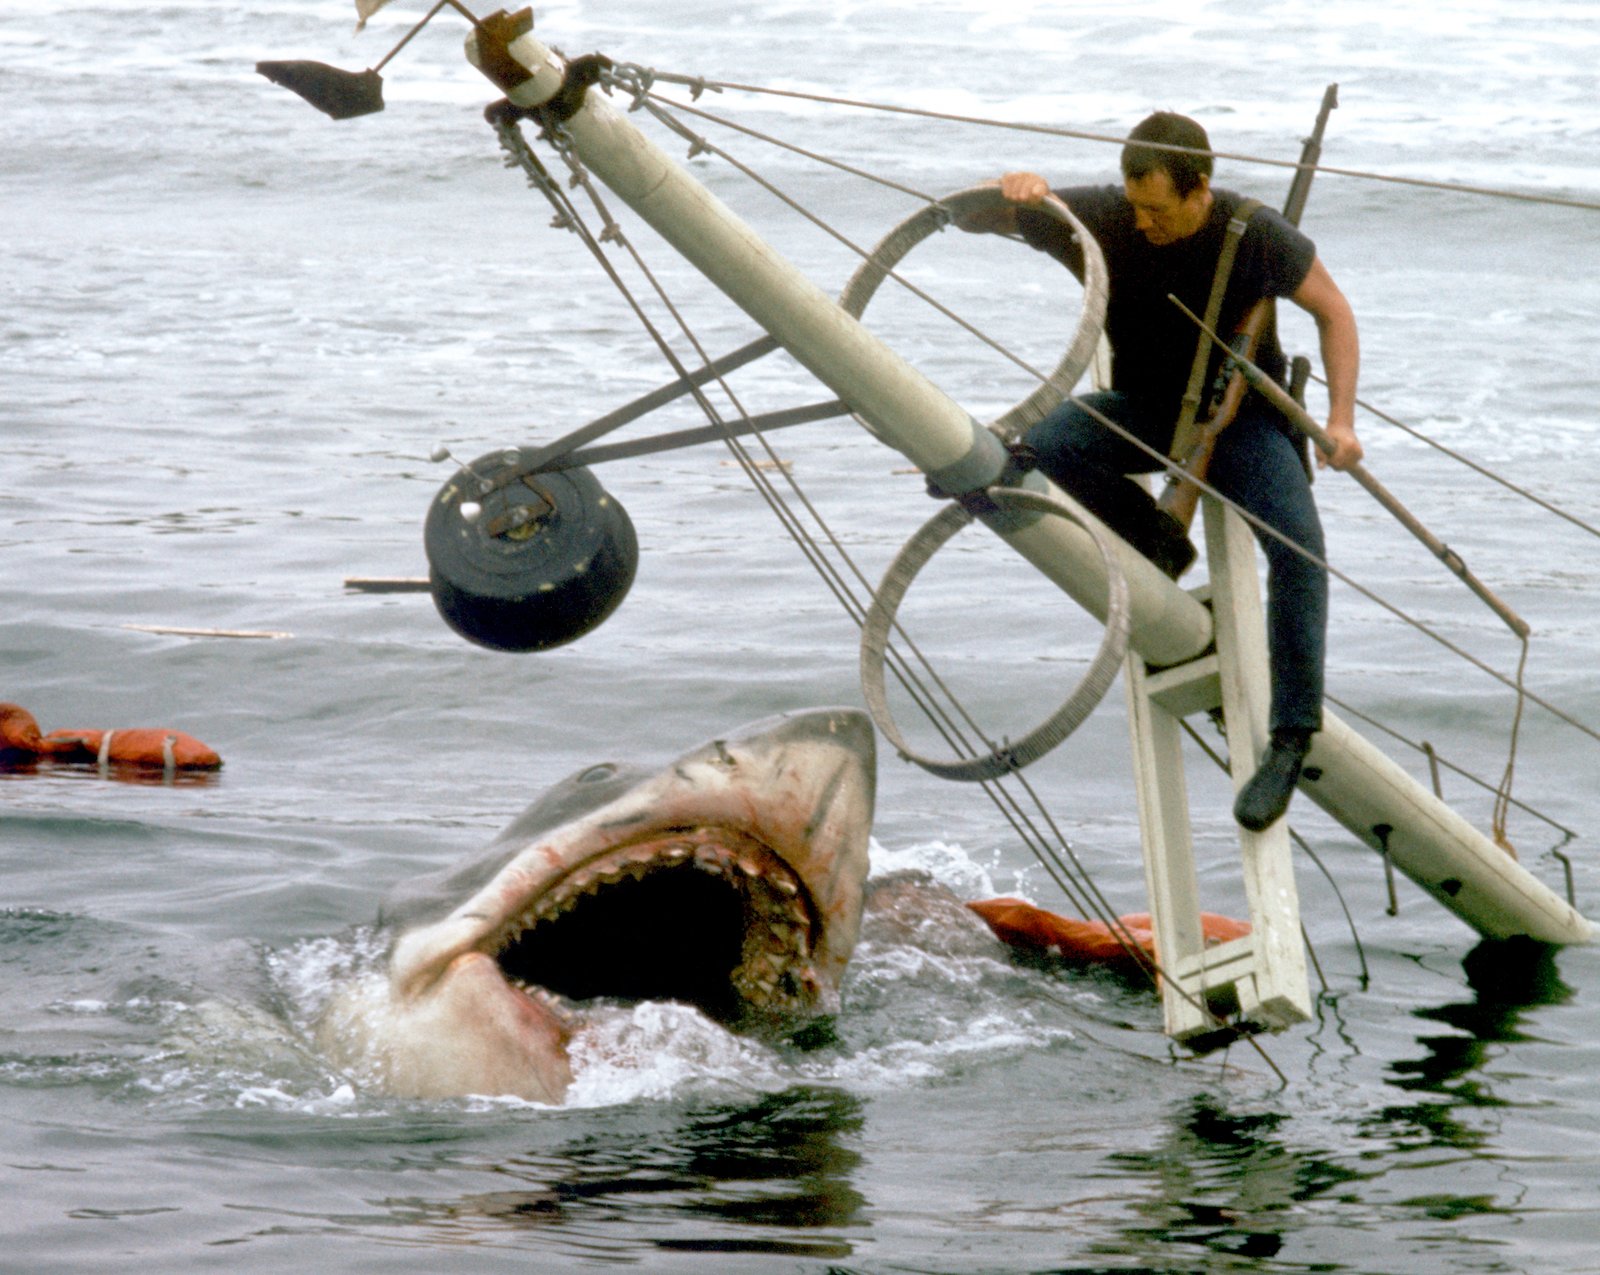 Roy Scheider fends off a blood thirsty shark while balancing on the tip of a sinking boat